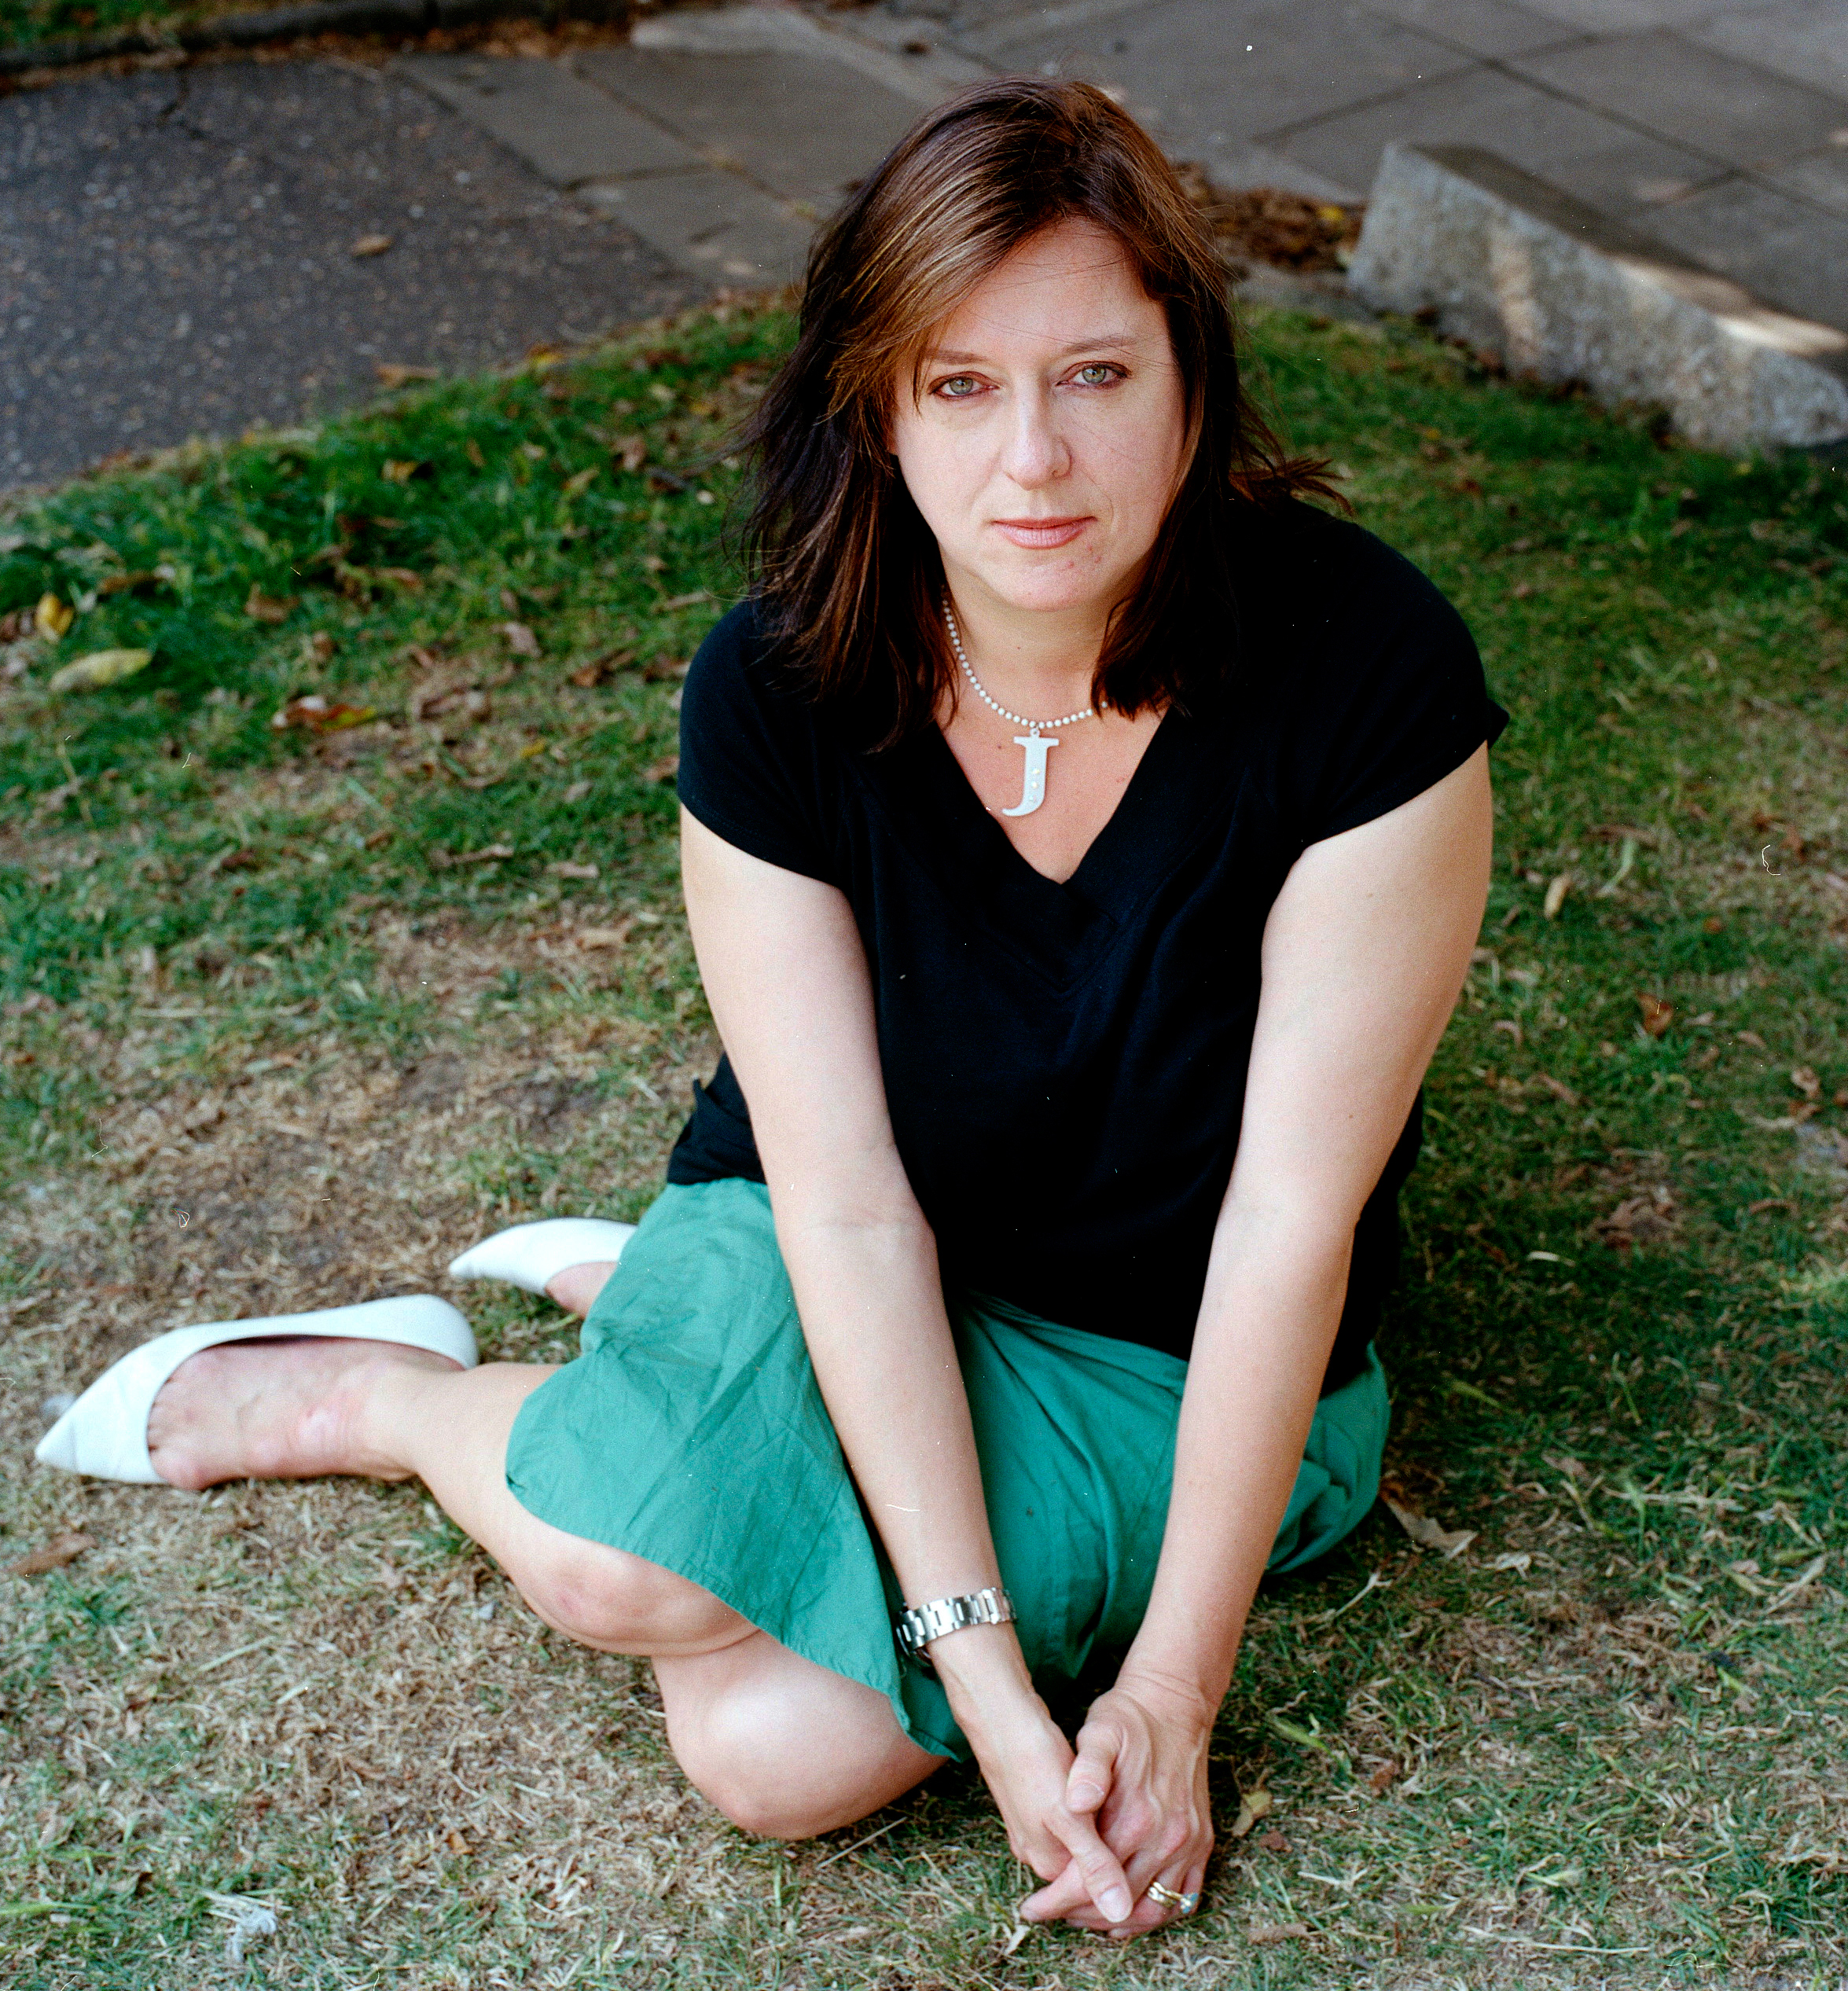 Columnist Julie Burchill, above, provoked complaints from readers by insulting transsexuals